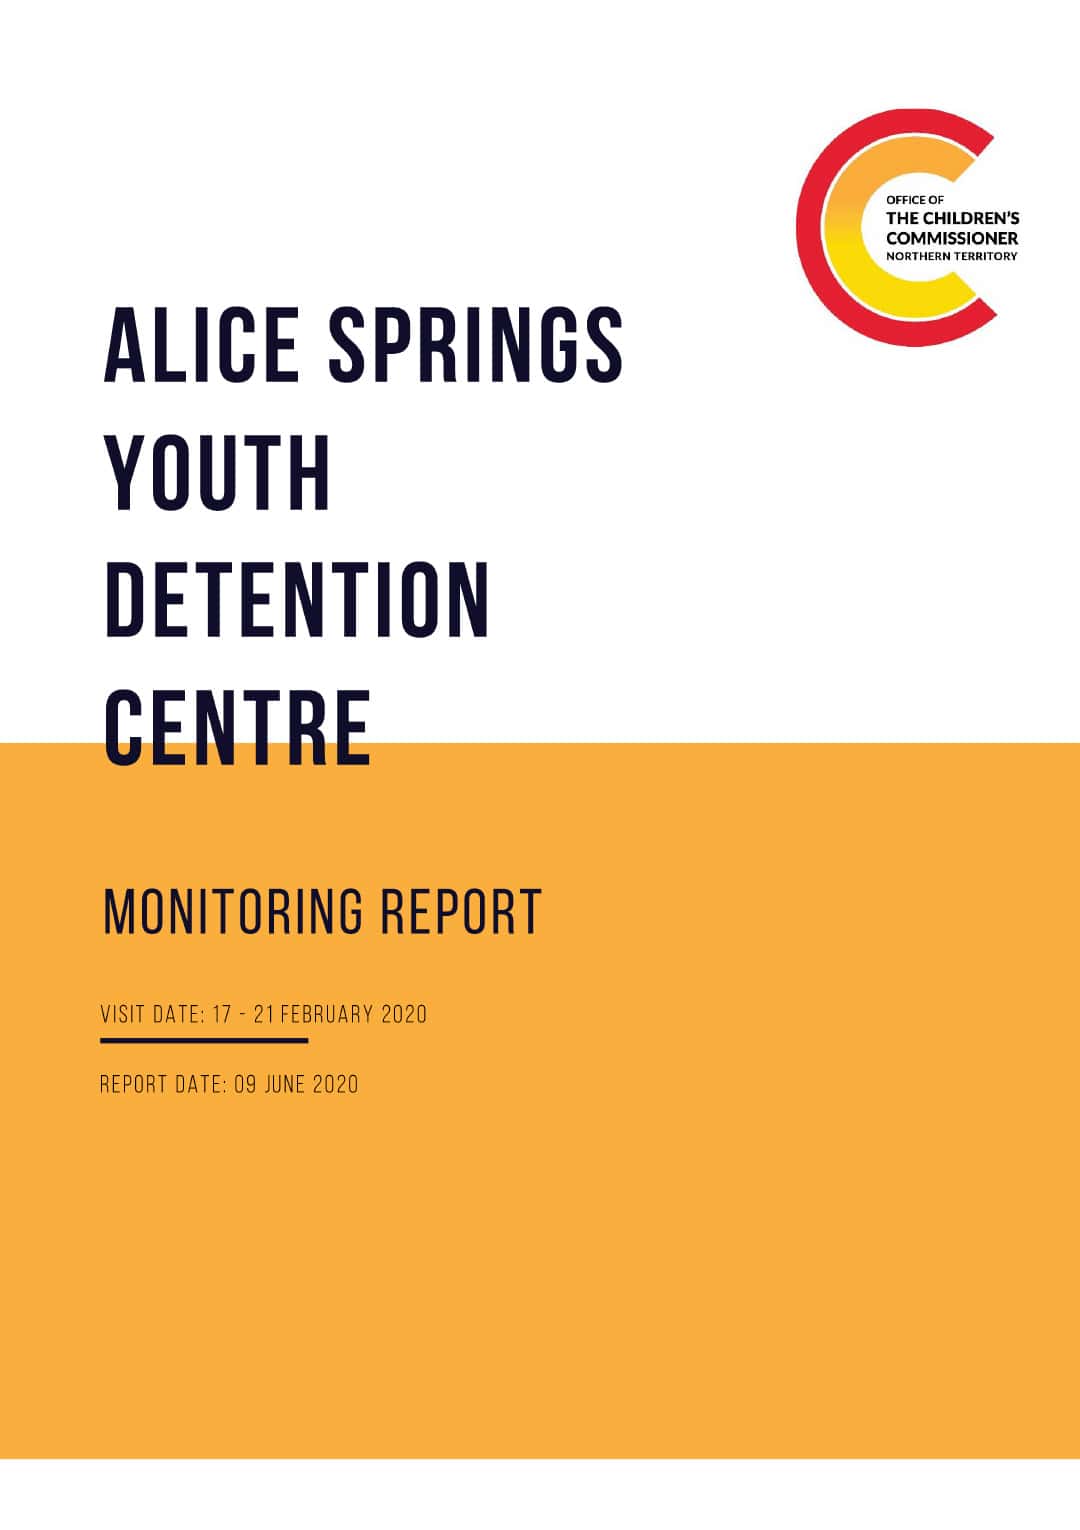 Alice Springs Youth Detention Center - Monitoring Report